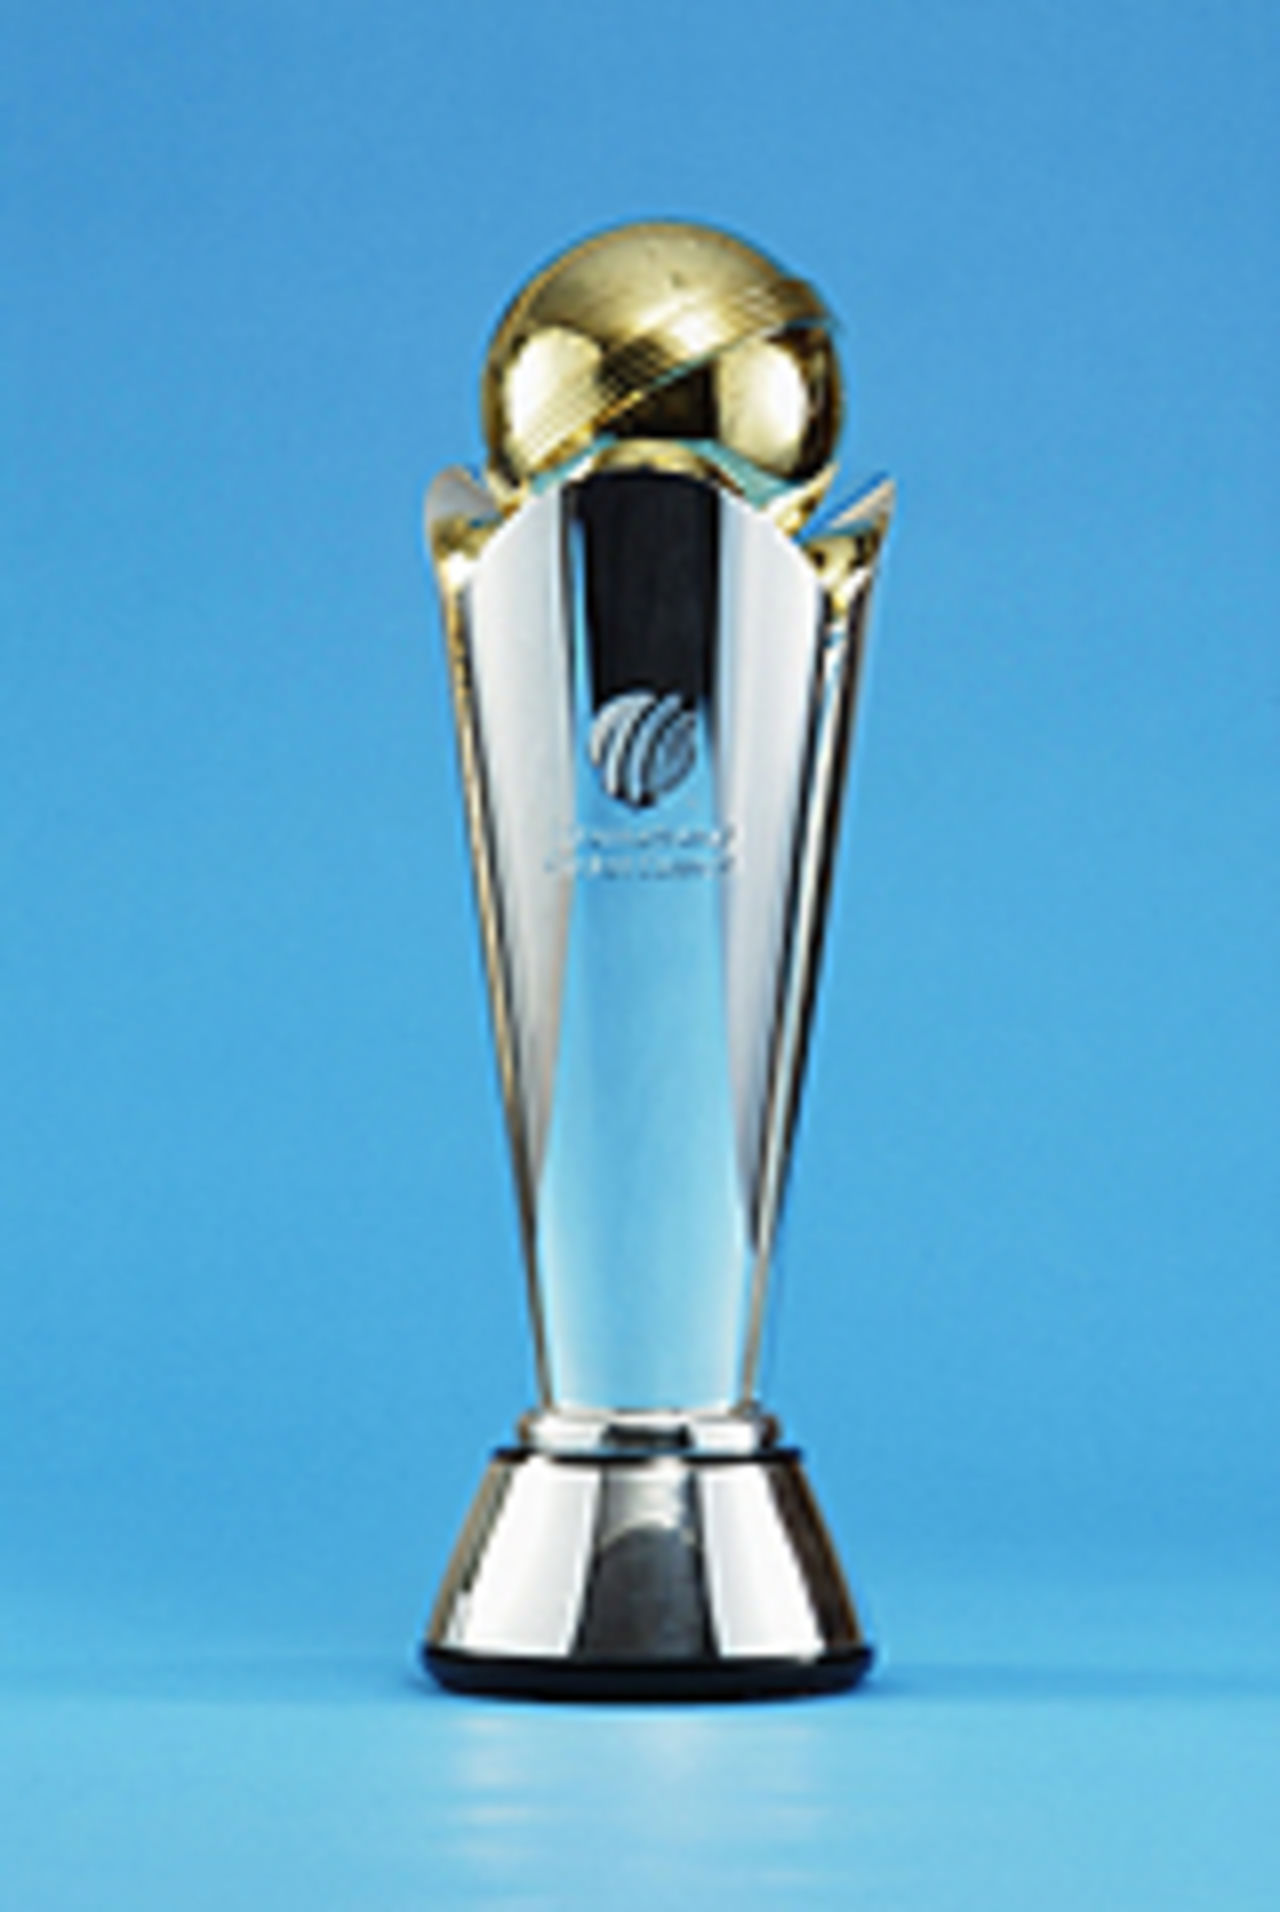 The Champions Trophy on display at Lords - May, 2004